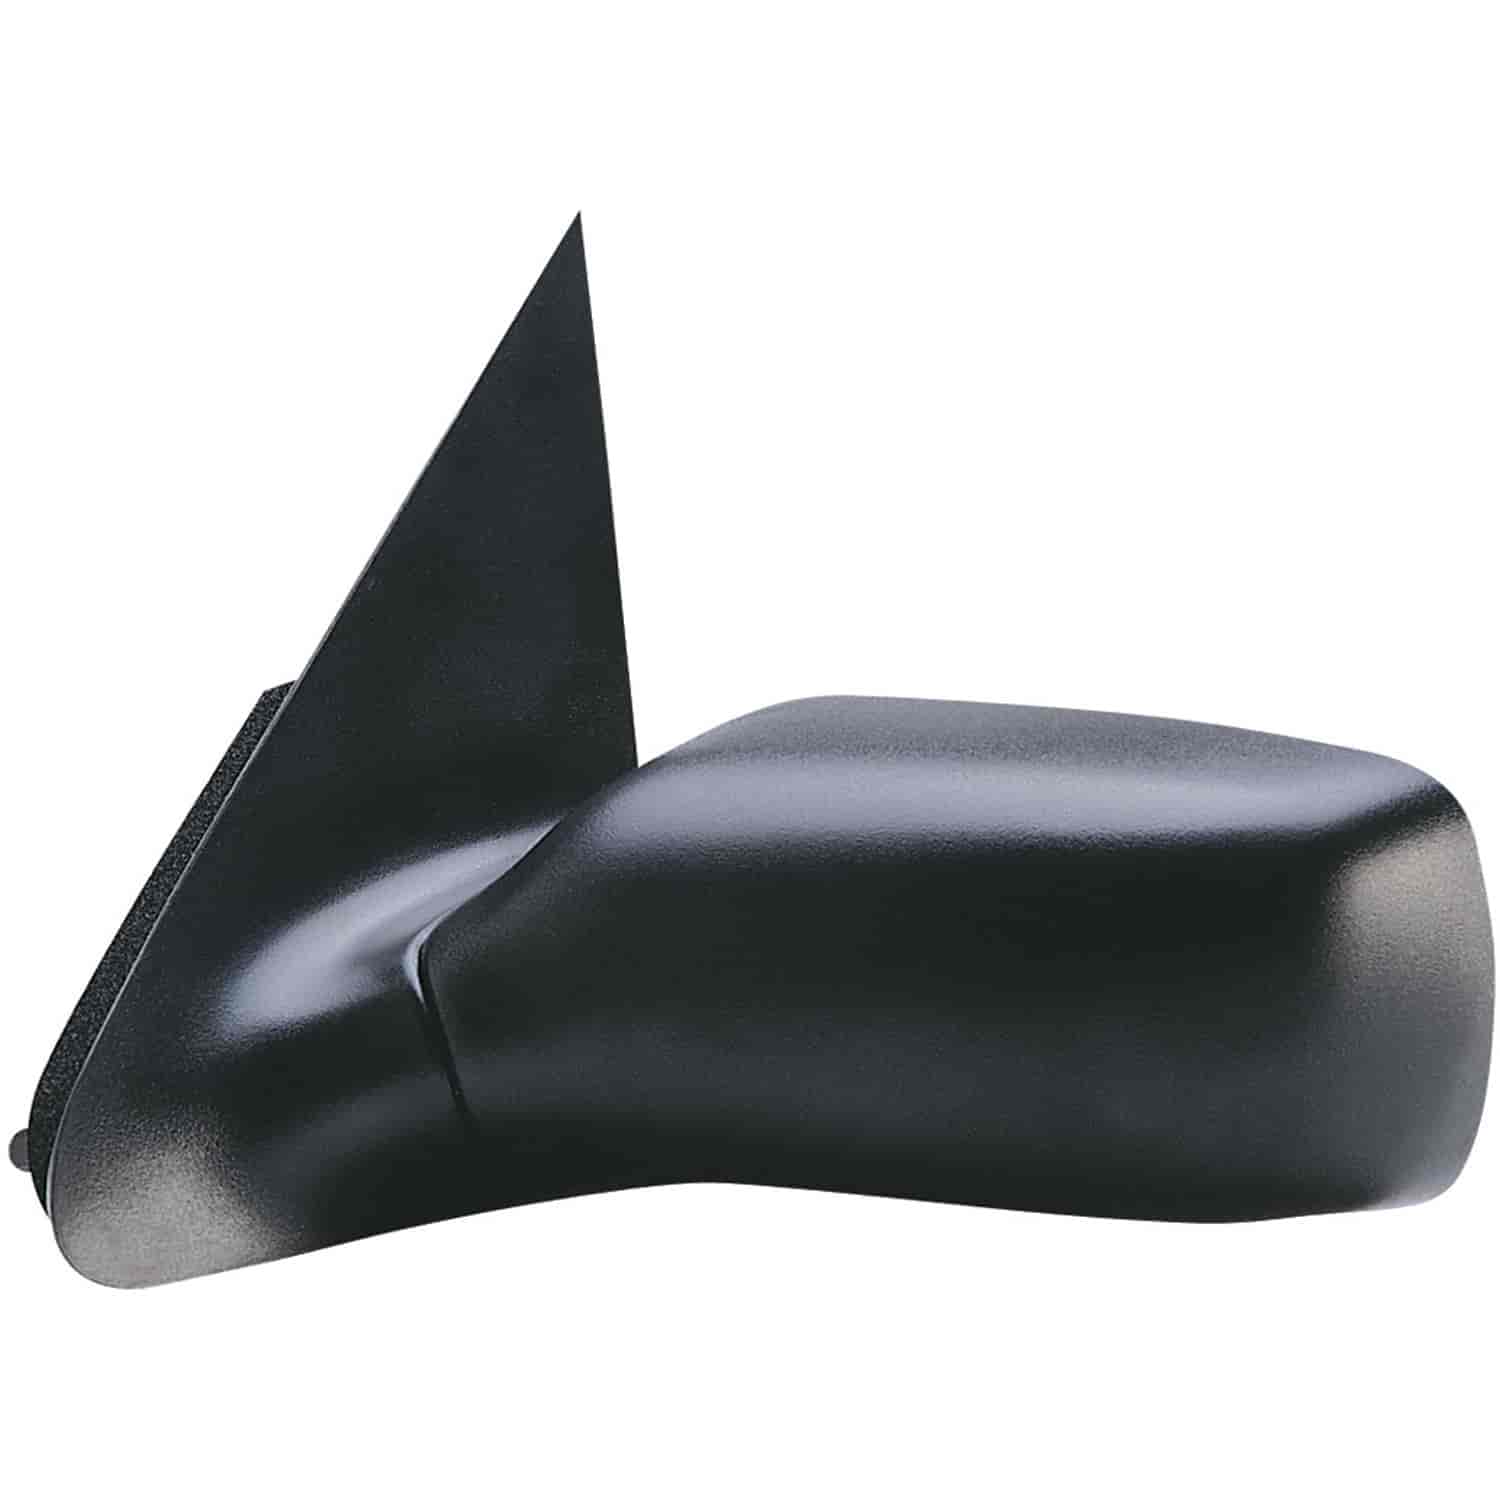 OEM Style Replacement mirror for 95-96 Ford Contour